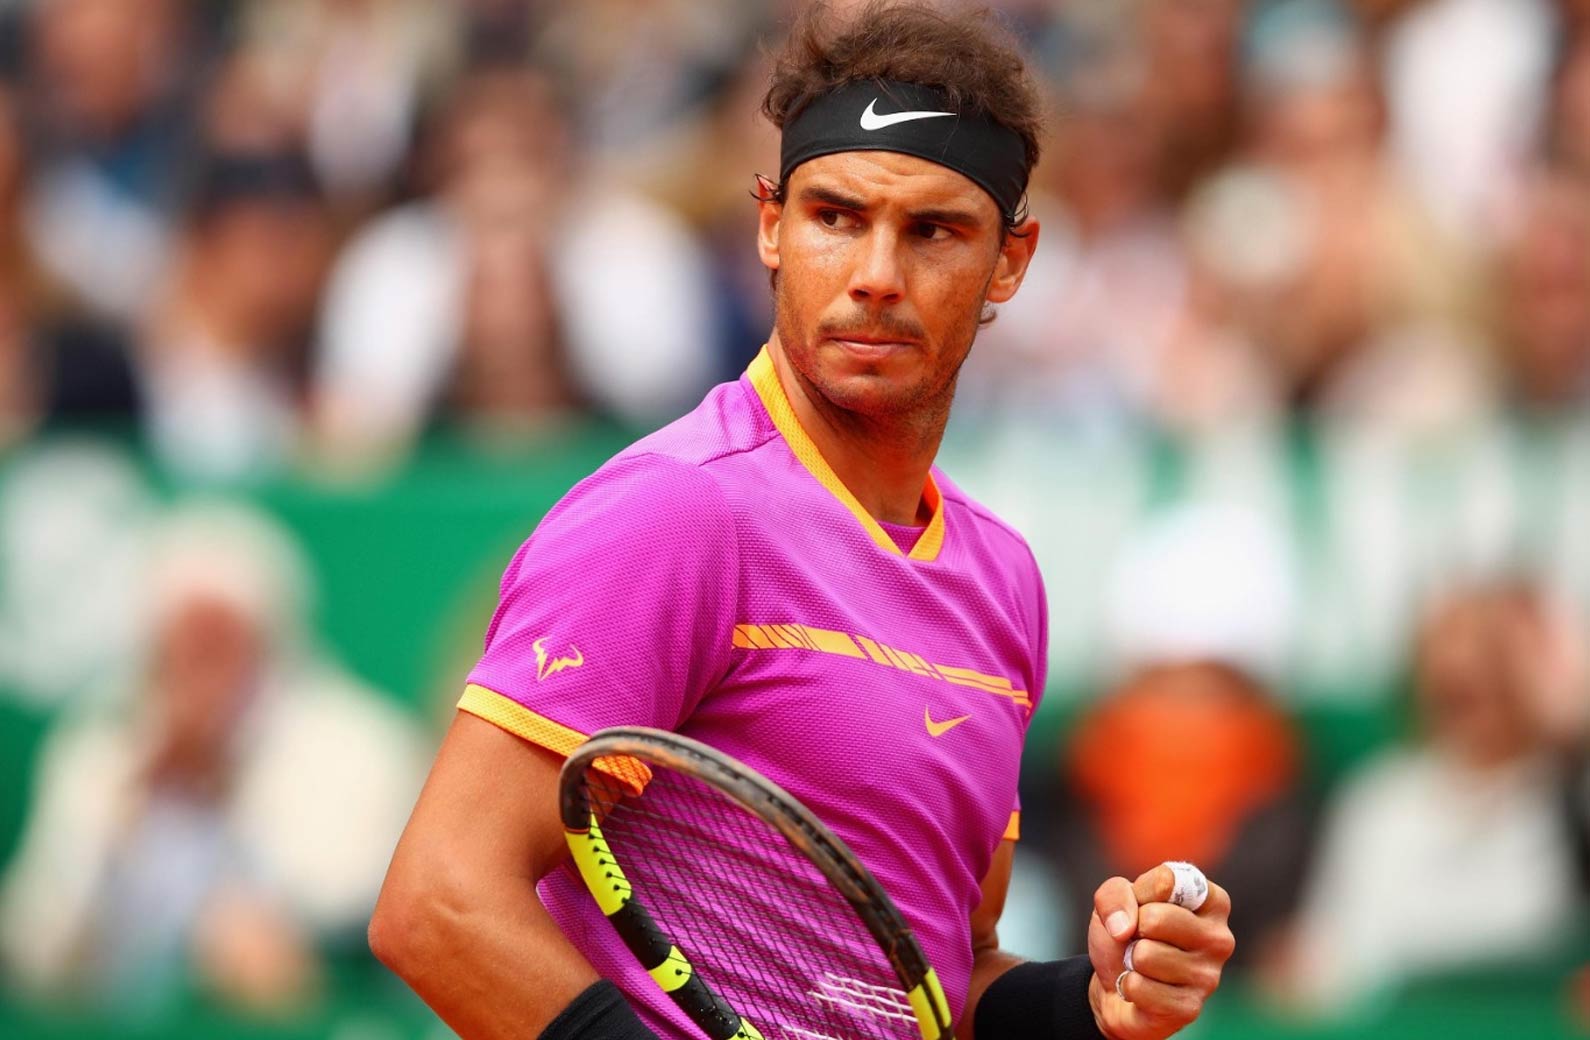 2022 French Open Odds & Preview